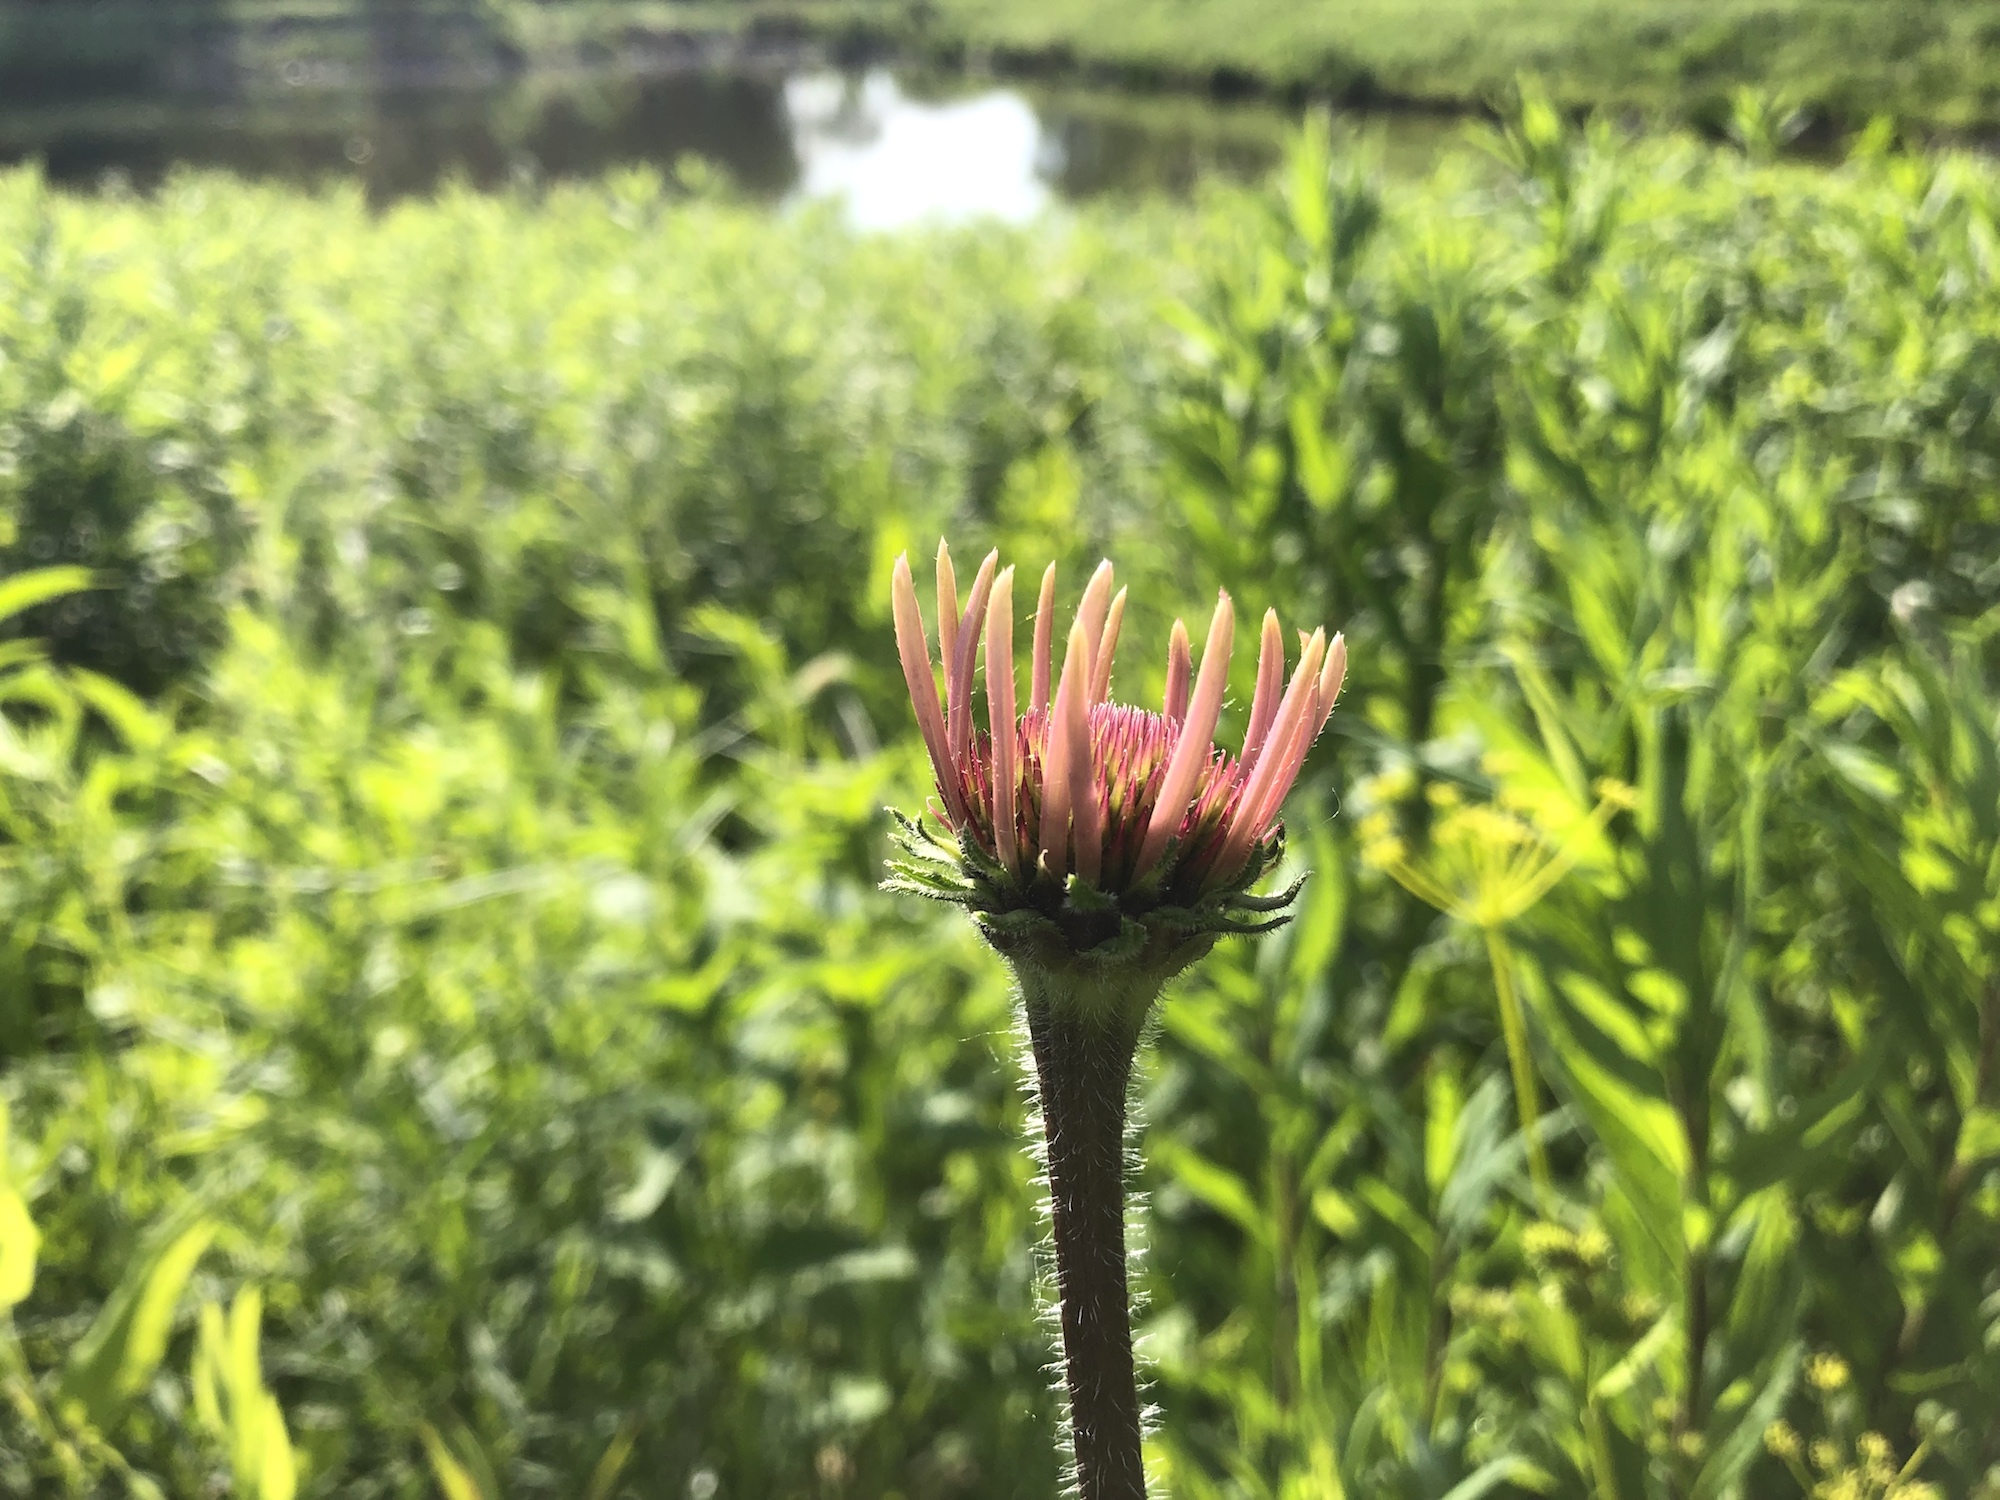 Pale purple coneflower on bank of Retaining Pond on corner of Nakoma Road and Manitou Way on June 11, 2019.